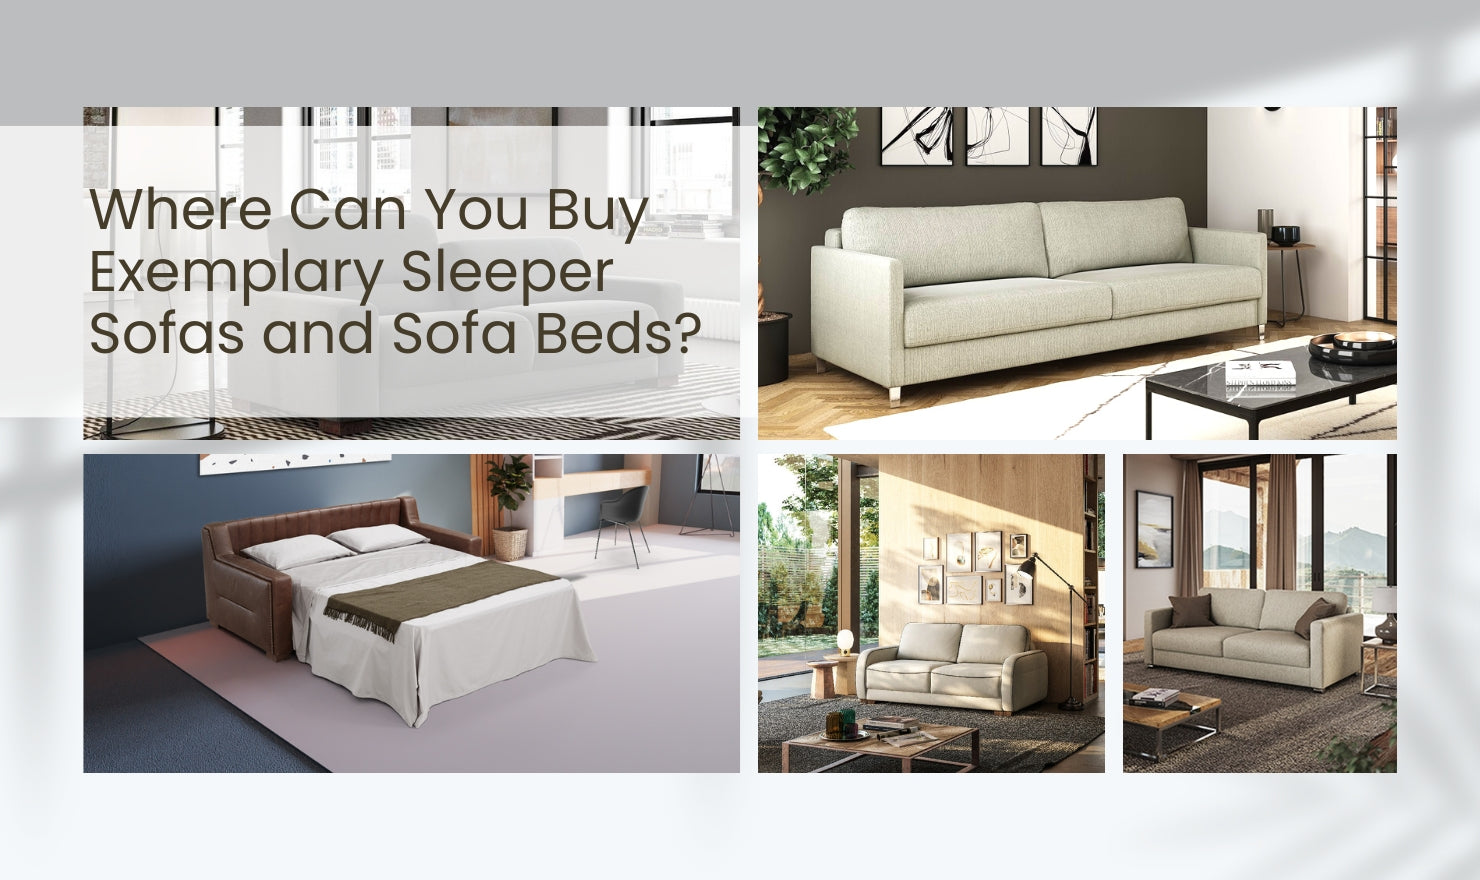 Where Can You Buy Exemplary Sleeper Sofas and Sofa Beds